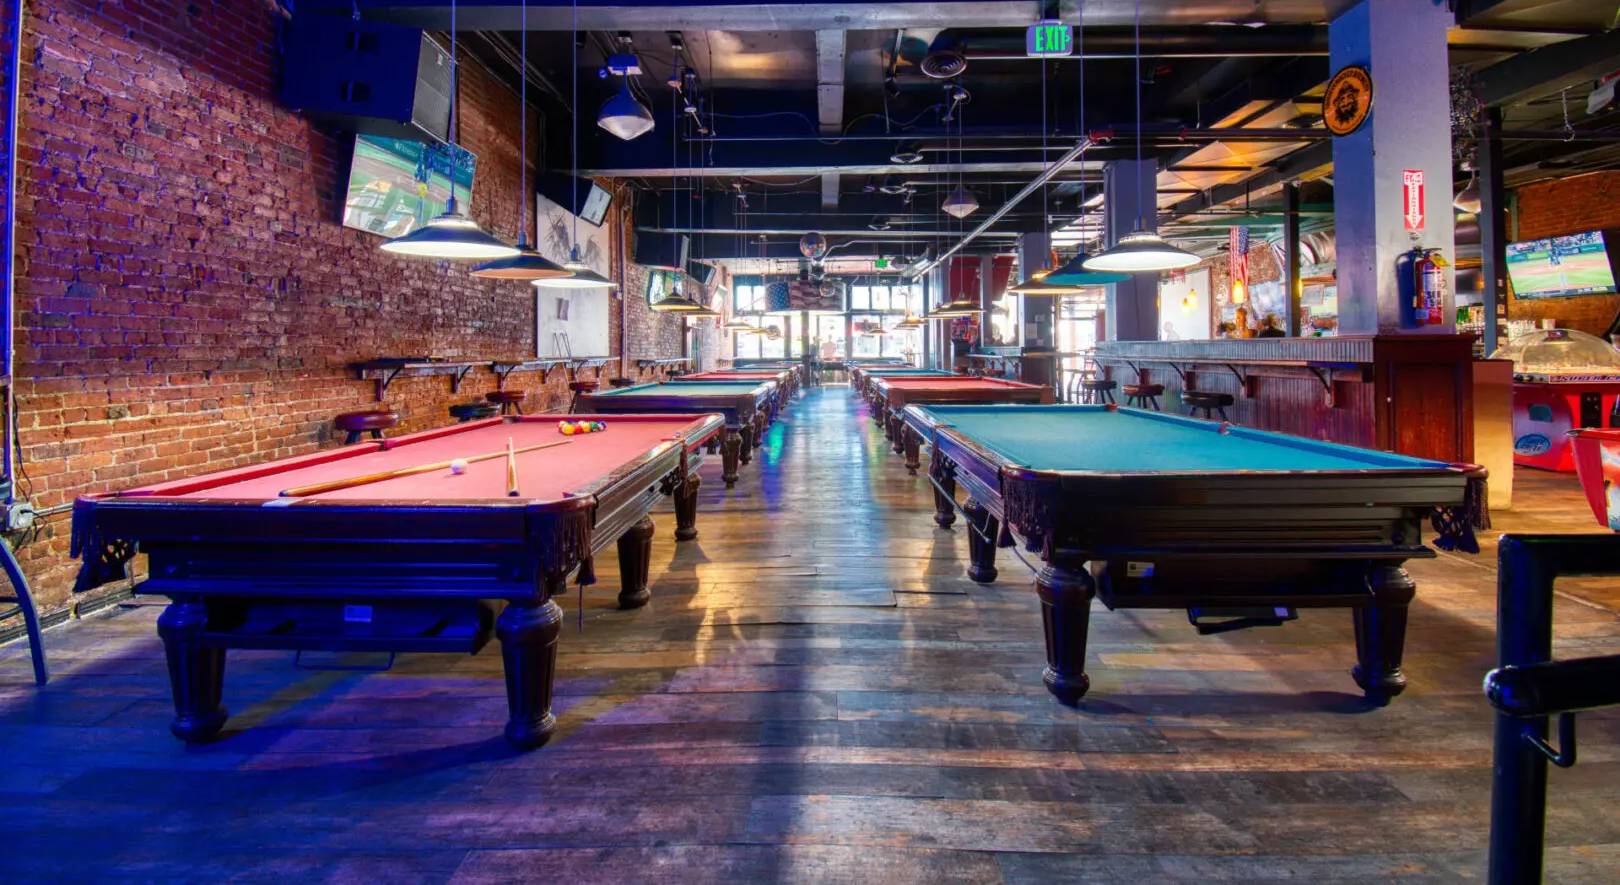 A row of pool tables in an empty room.